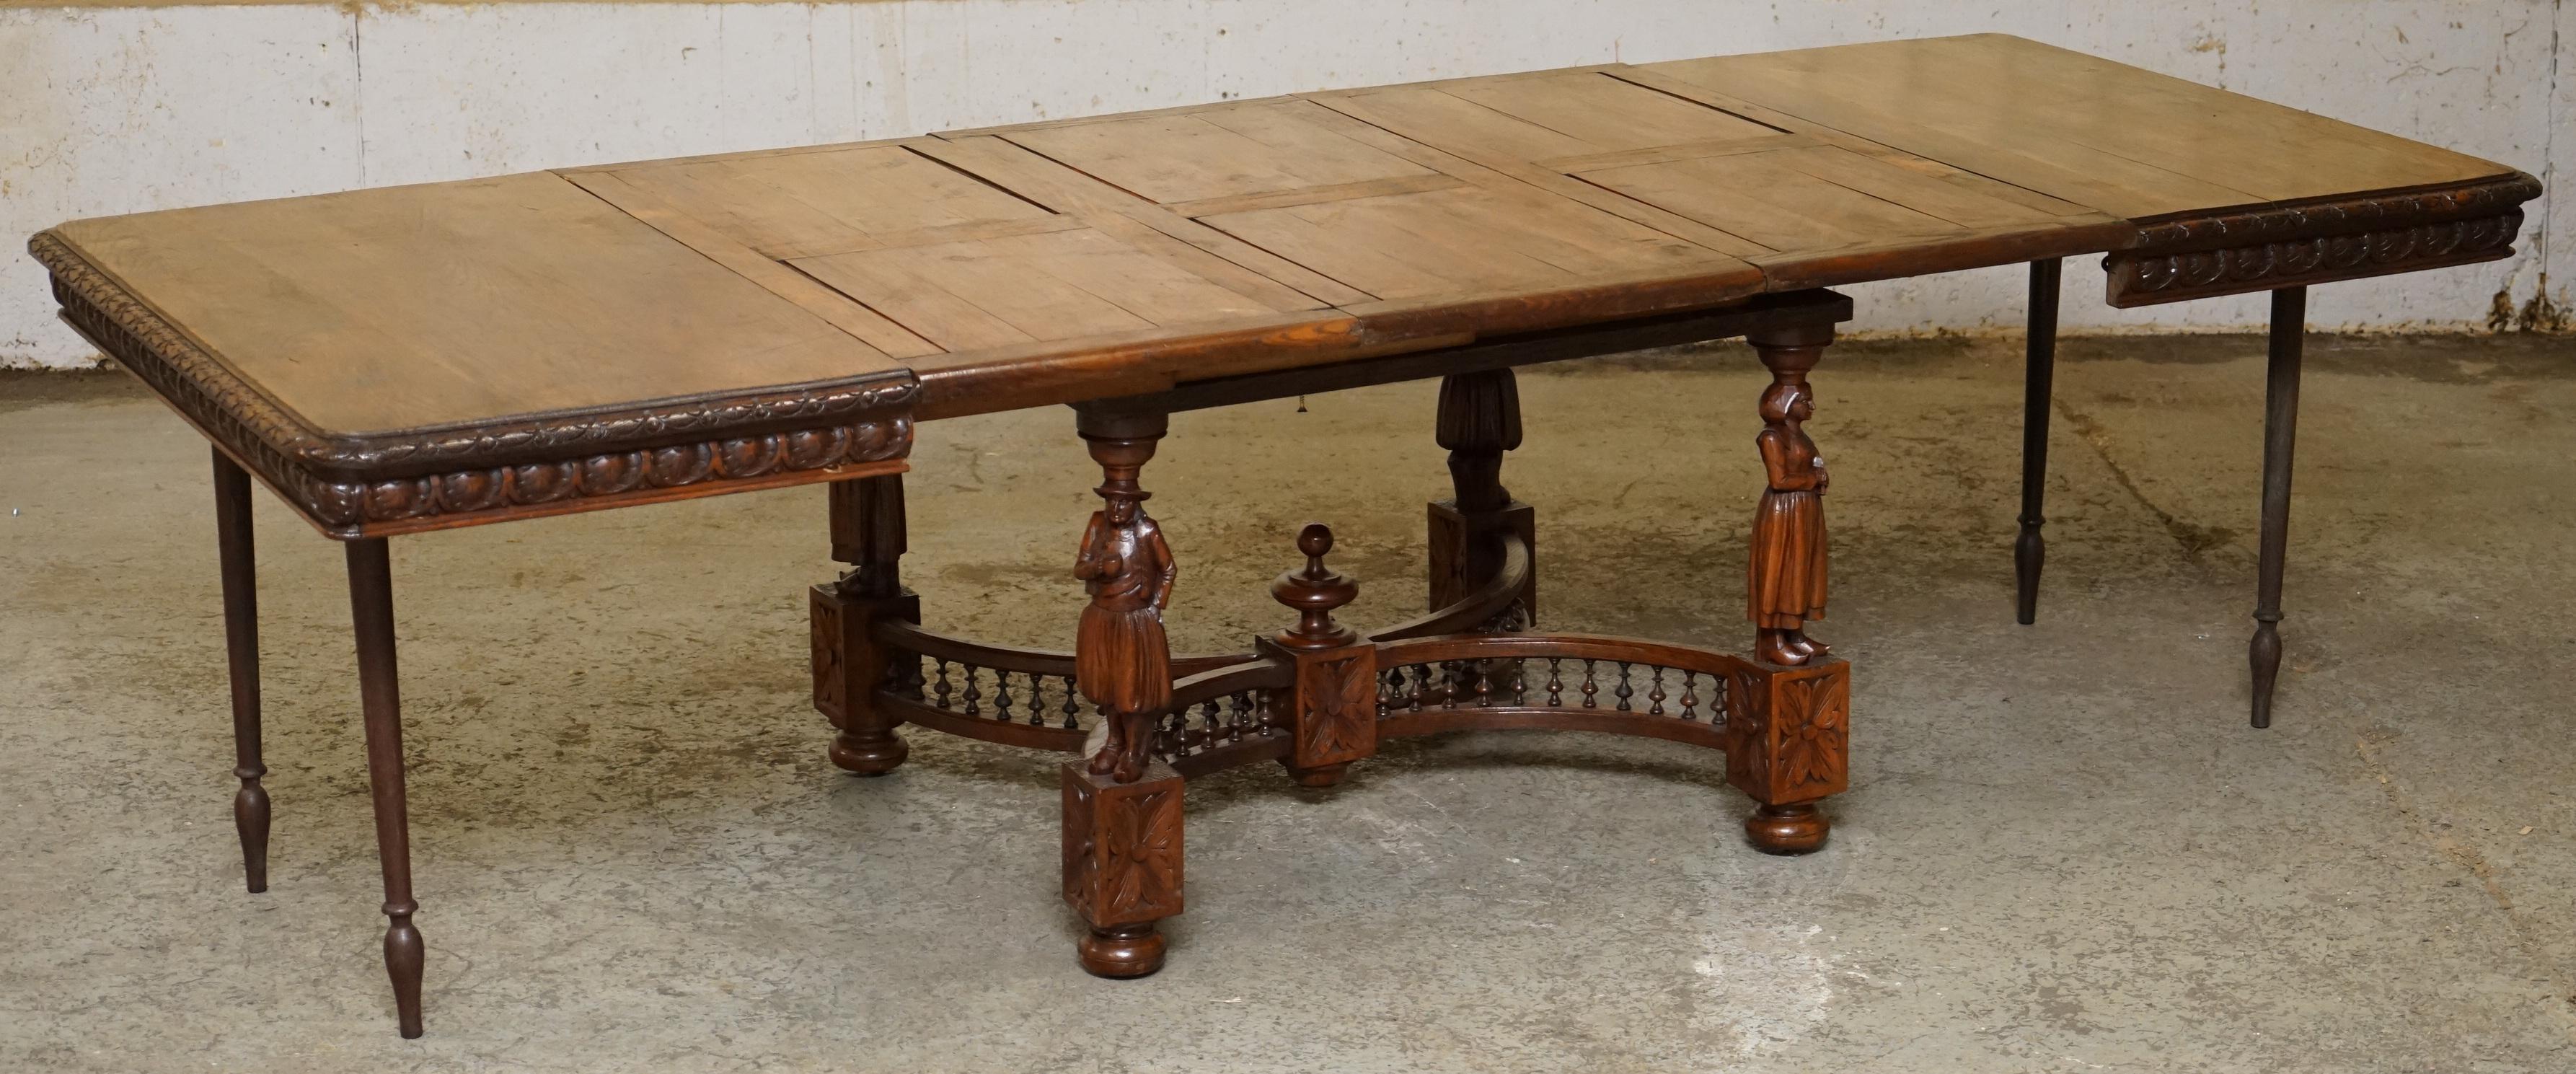 Rare circa 1880 French Brittany Hand Carved Chestnut Wood Extending Dining Table 10